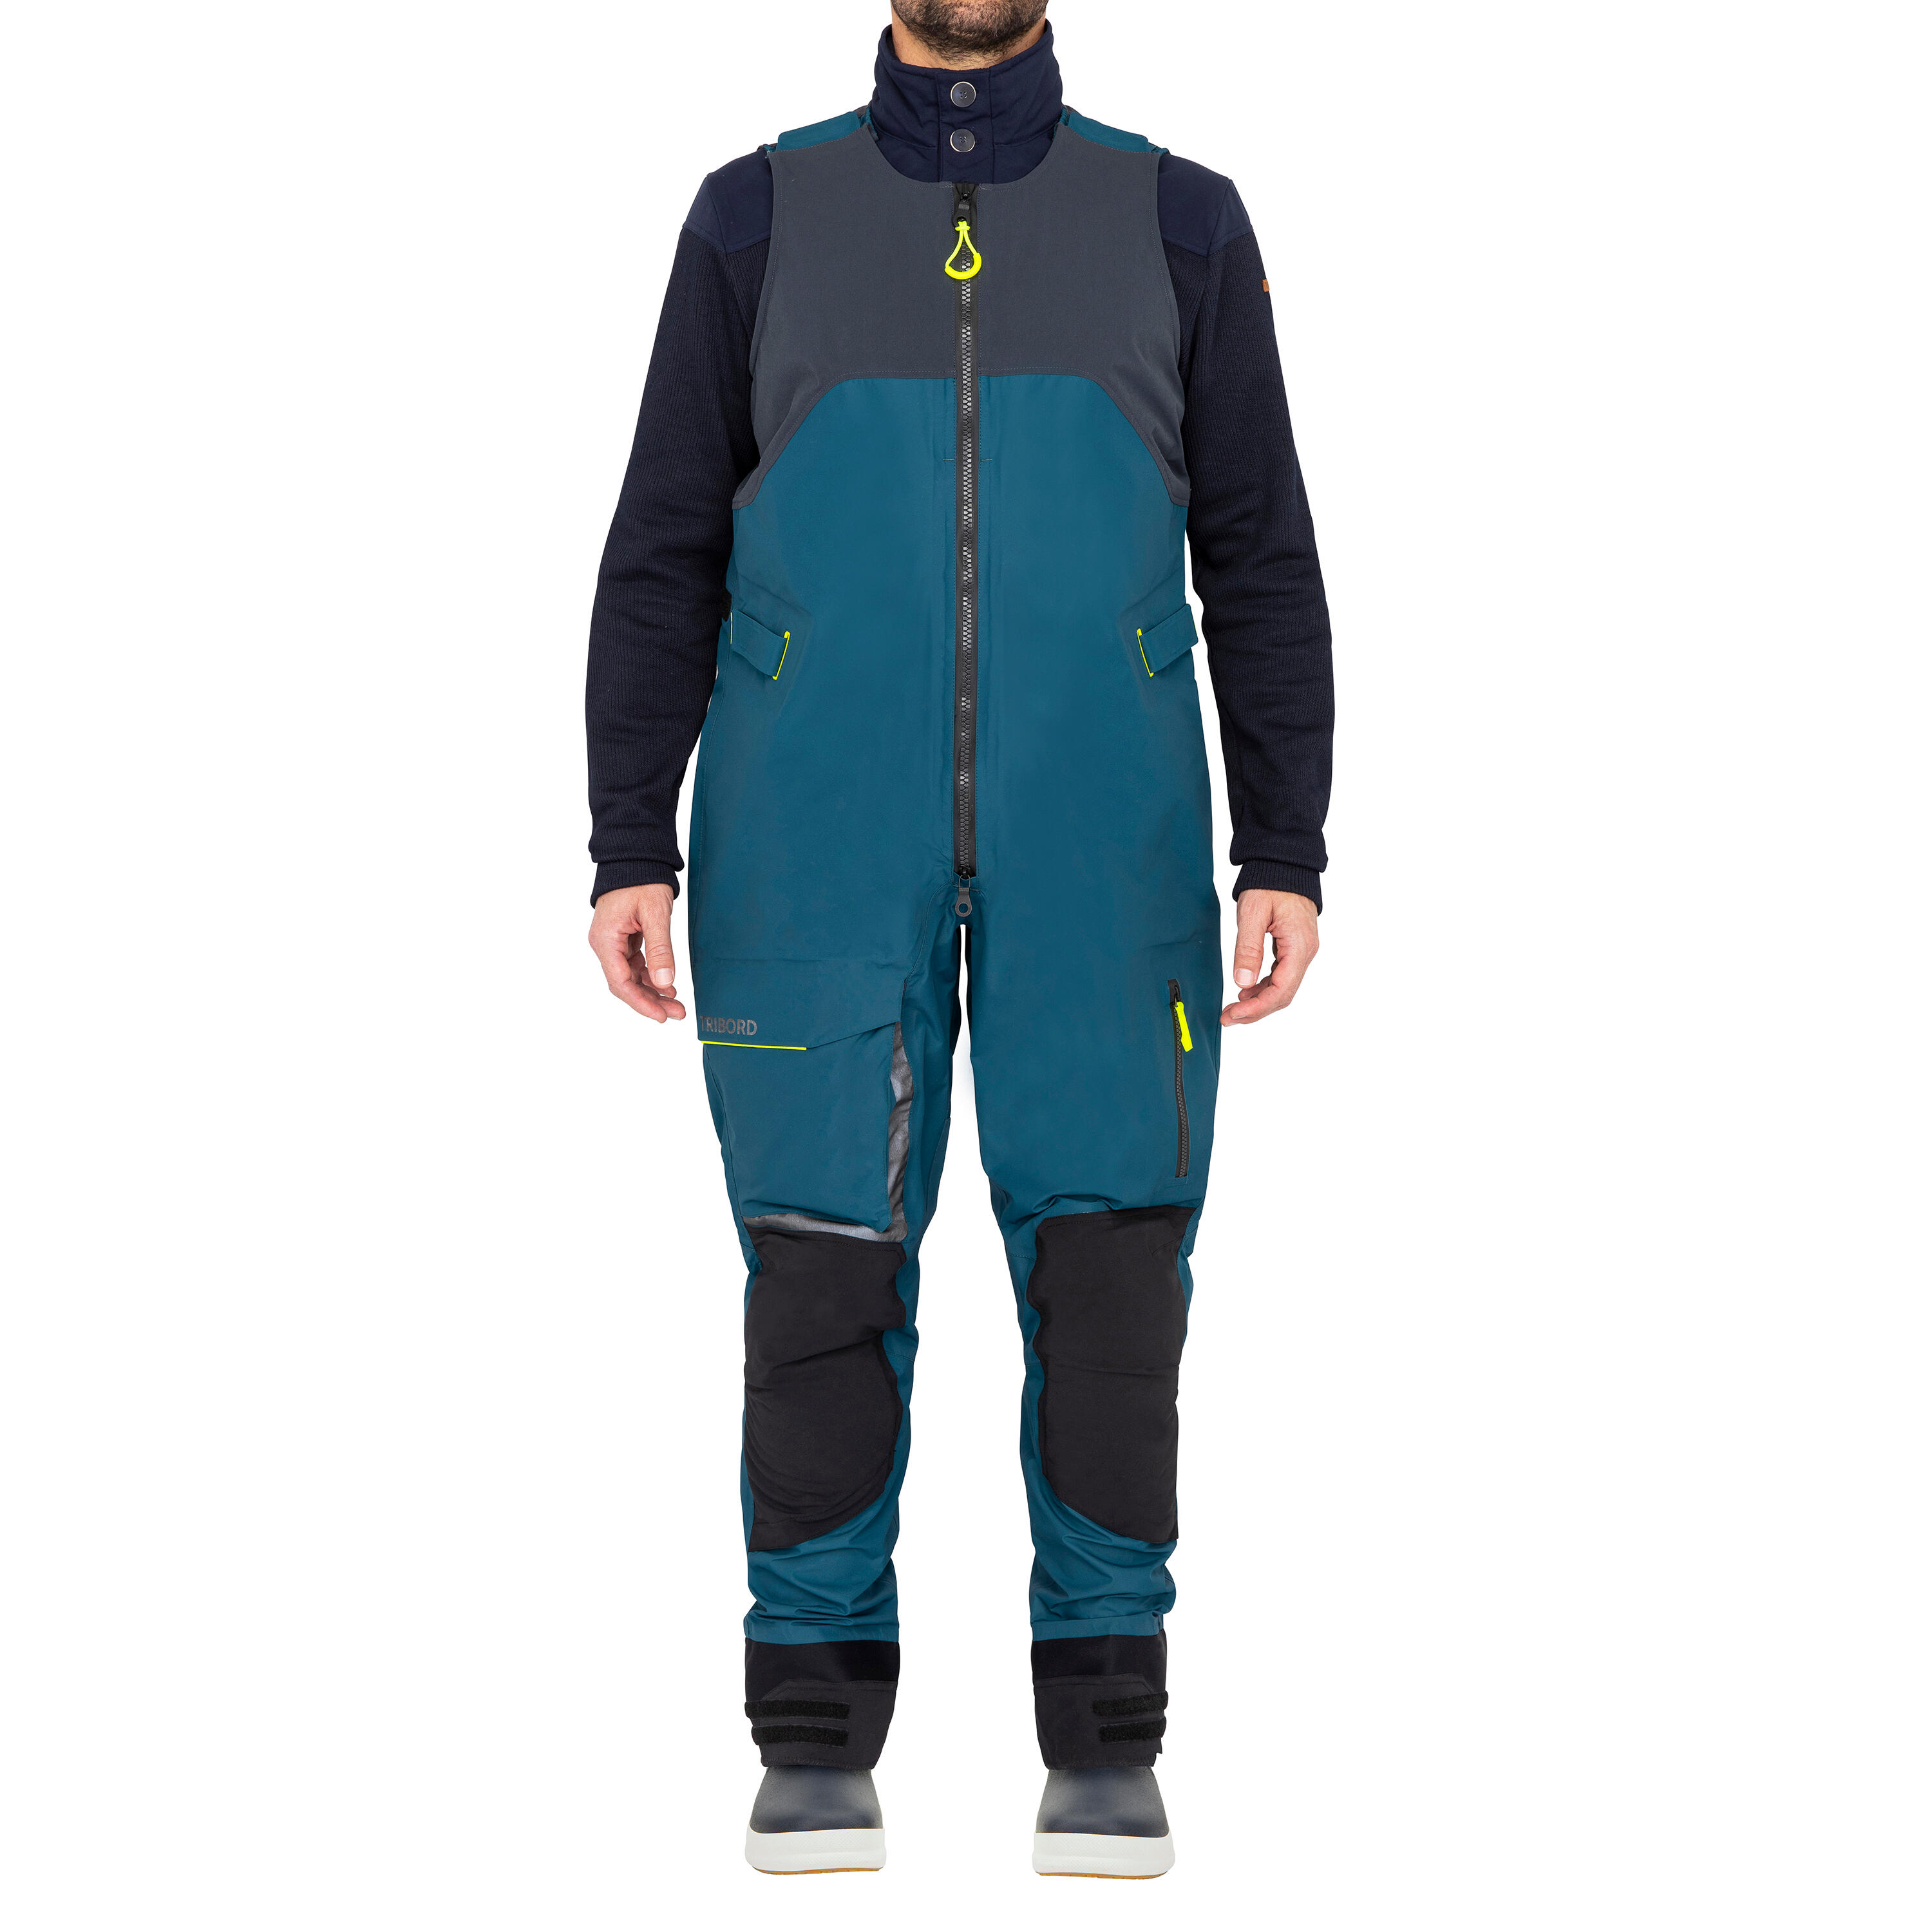 Adult Sailing overalls - Offshore Race 900 Petrol 6/16